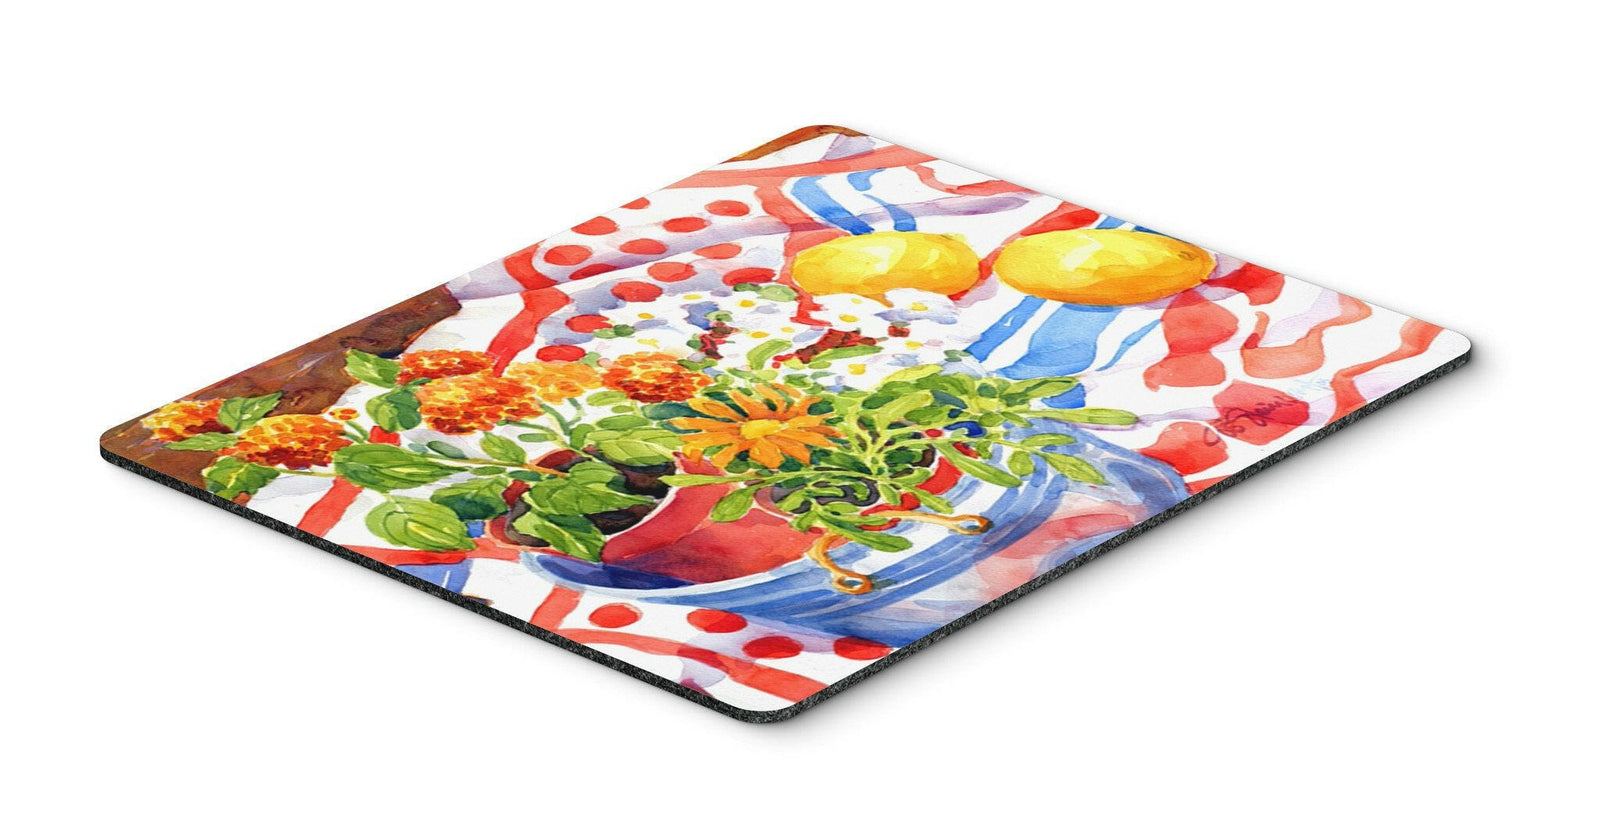 Flowers with a side of lemons  Mouse pad, hot pad, or trivet by Caroline's Treasures